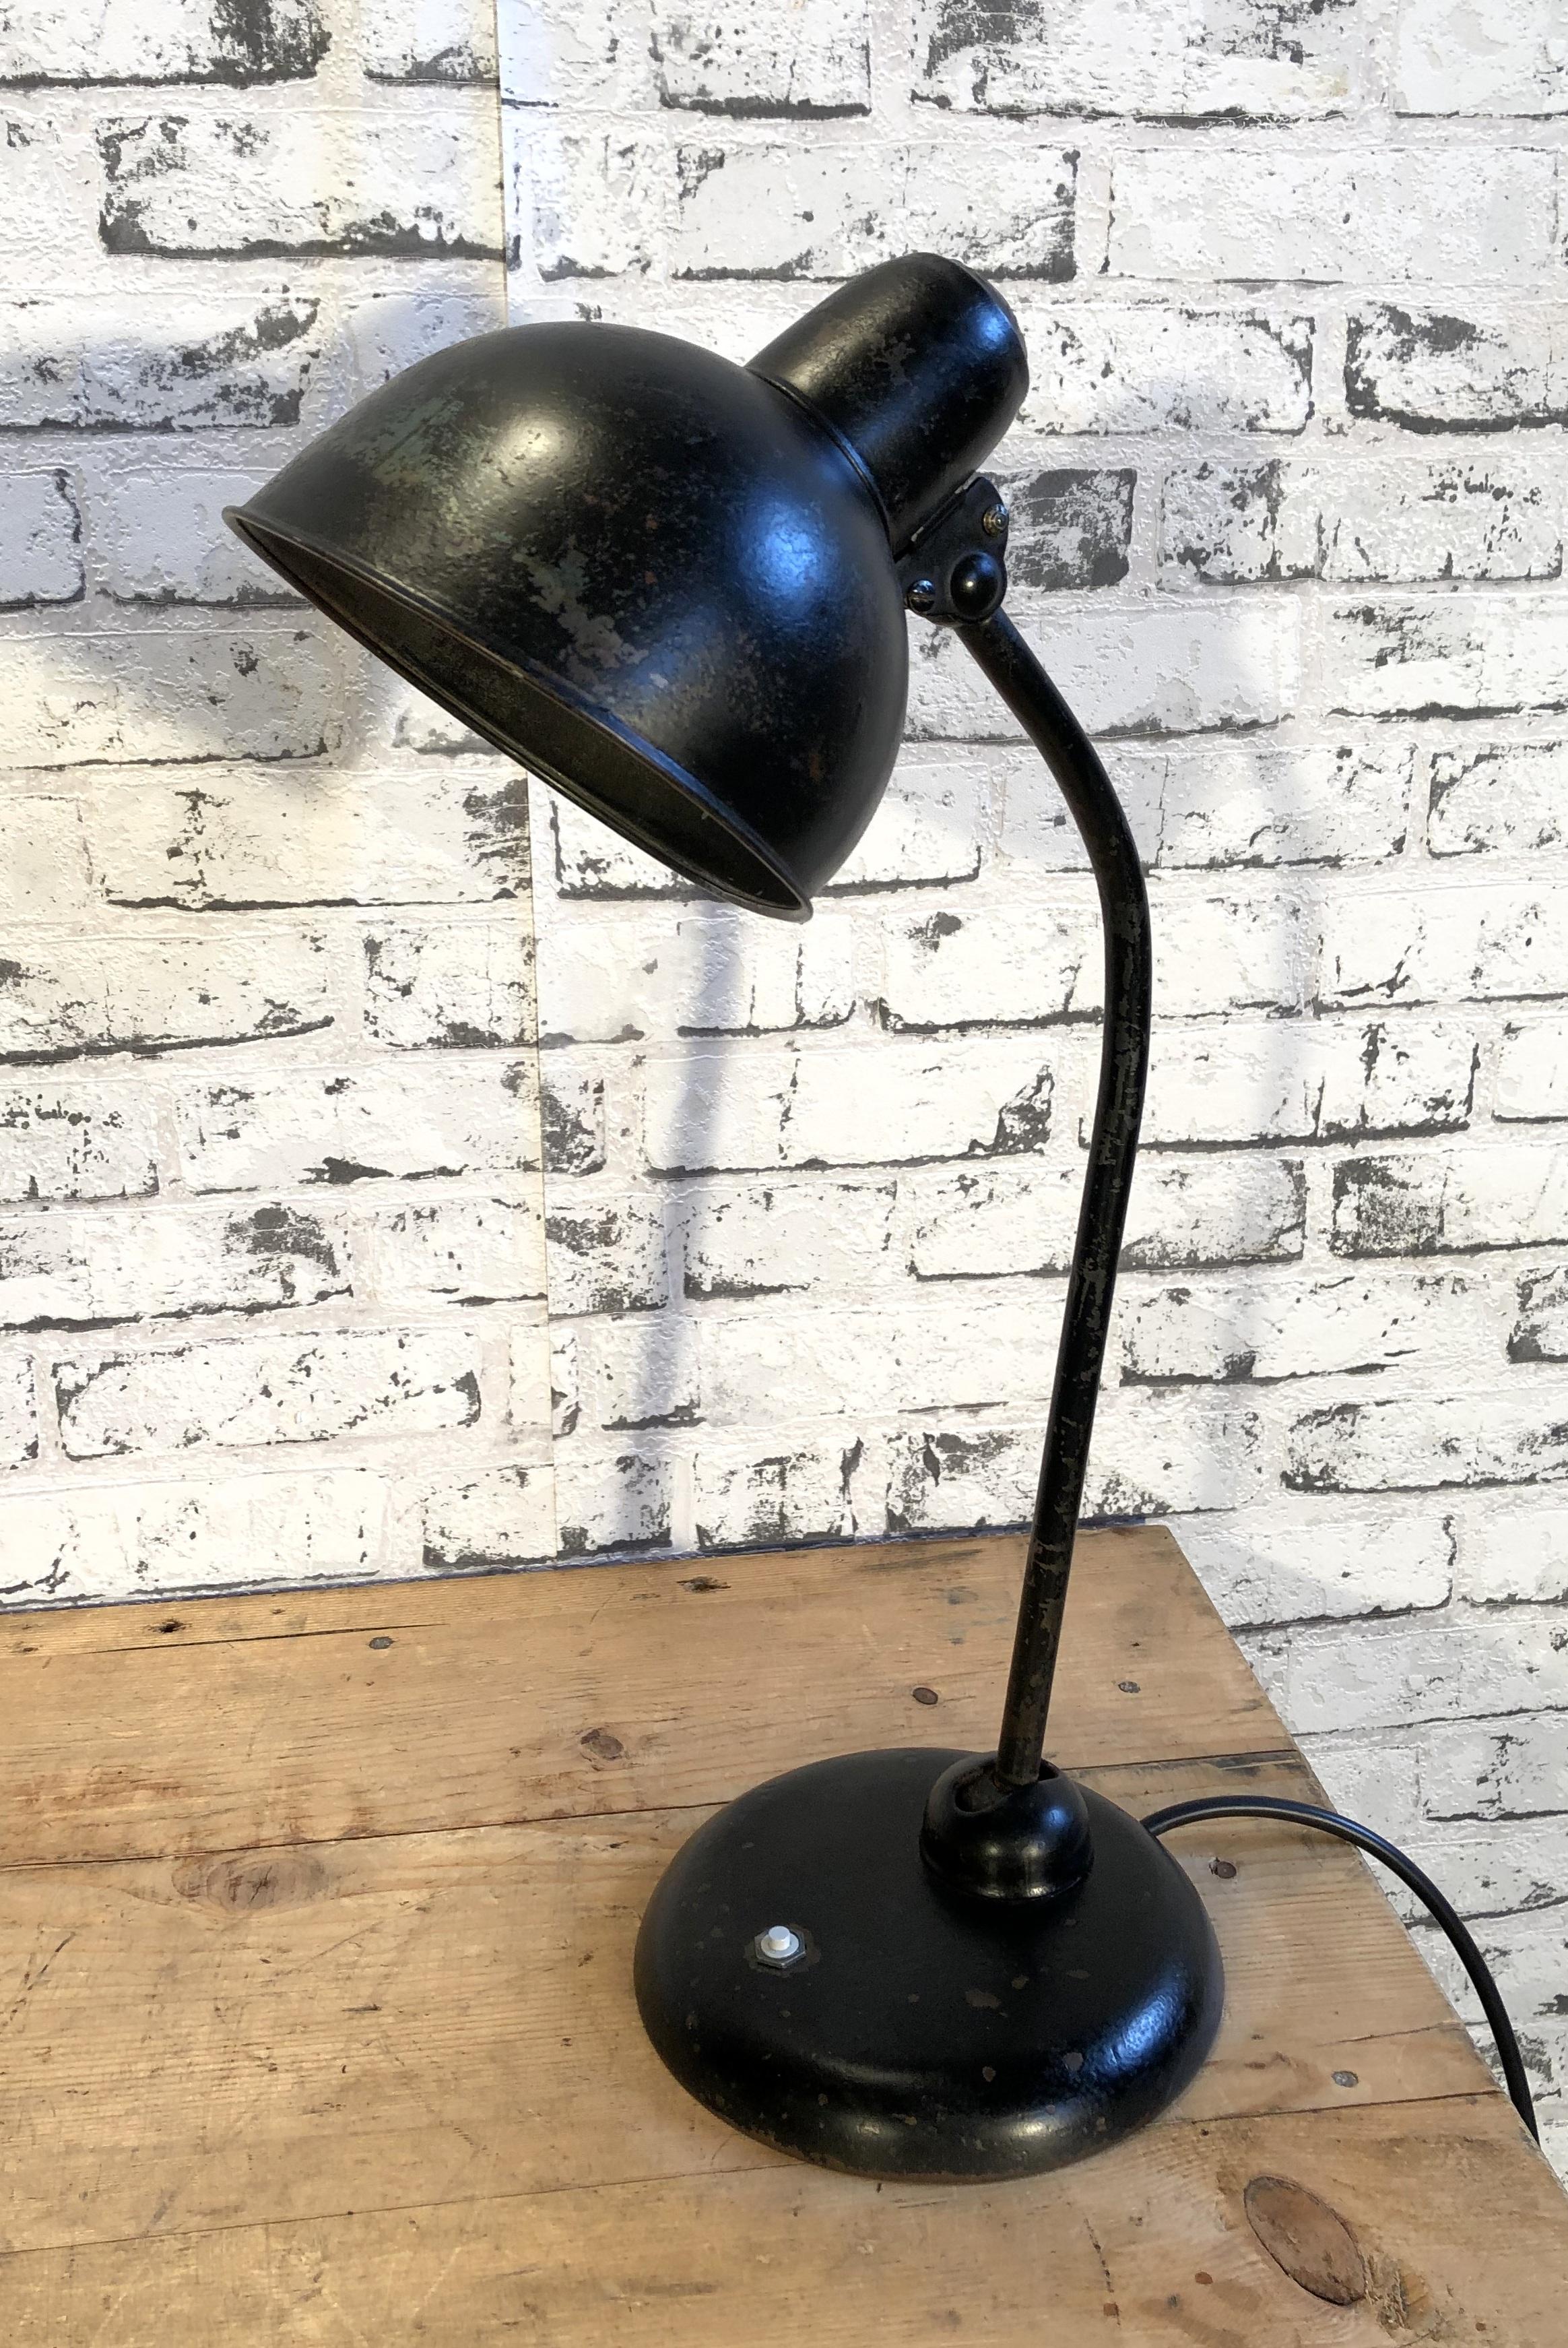 This industrial Bauhaus table lamp was designed by Christian Dell and produced by Kaiser Idell in Germany during the 1930s. The lamp has two adjustable joints and a socket for E 27 lightbulbs. Good vintage condition.